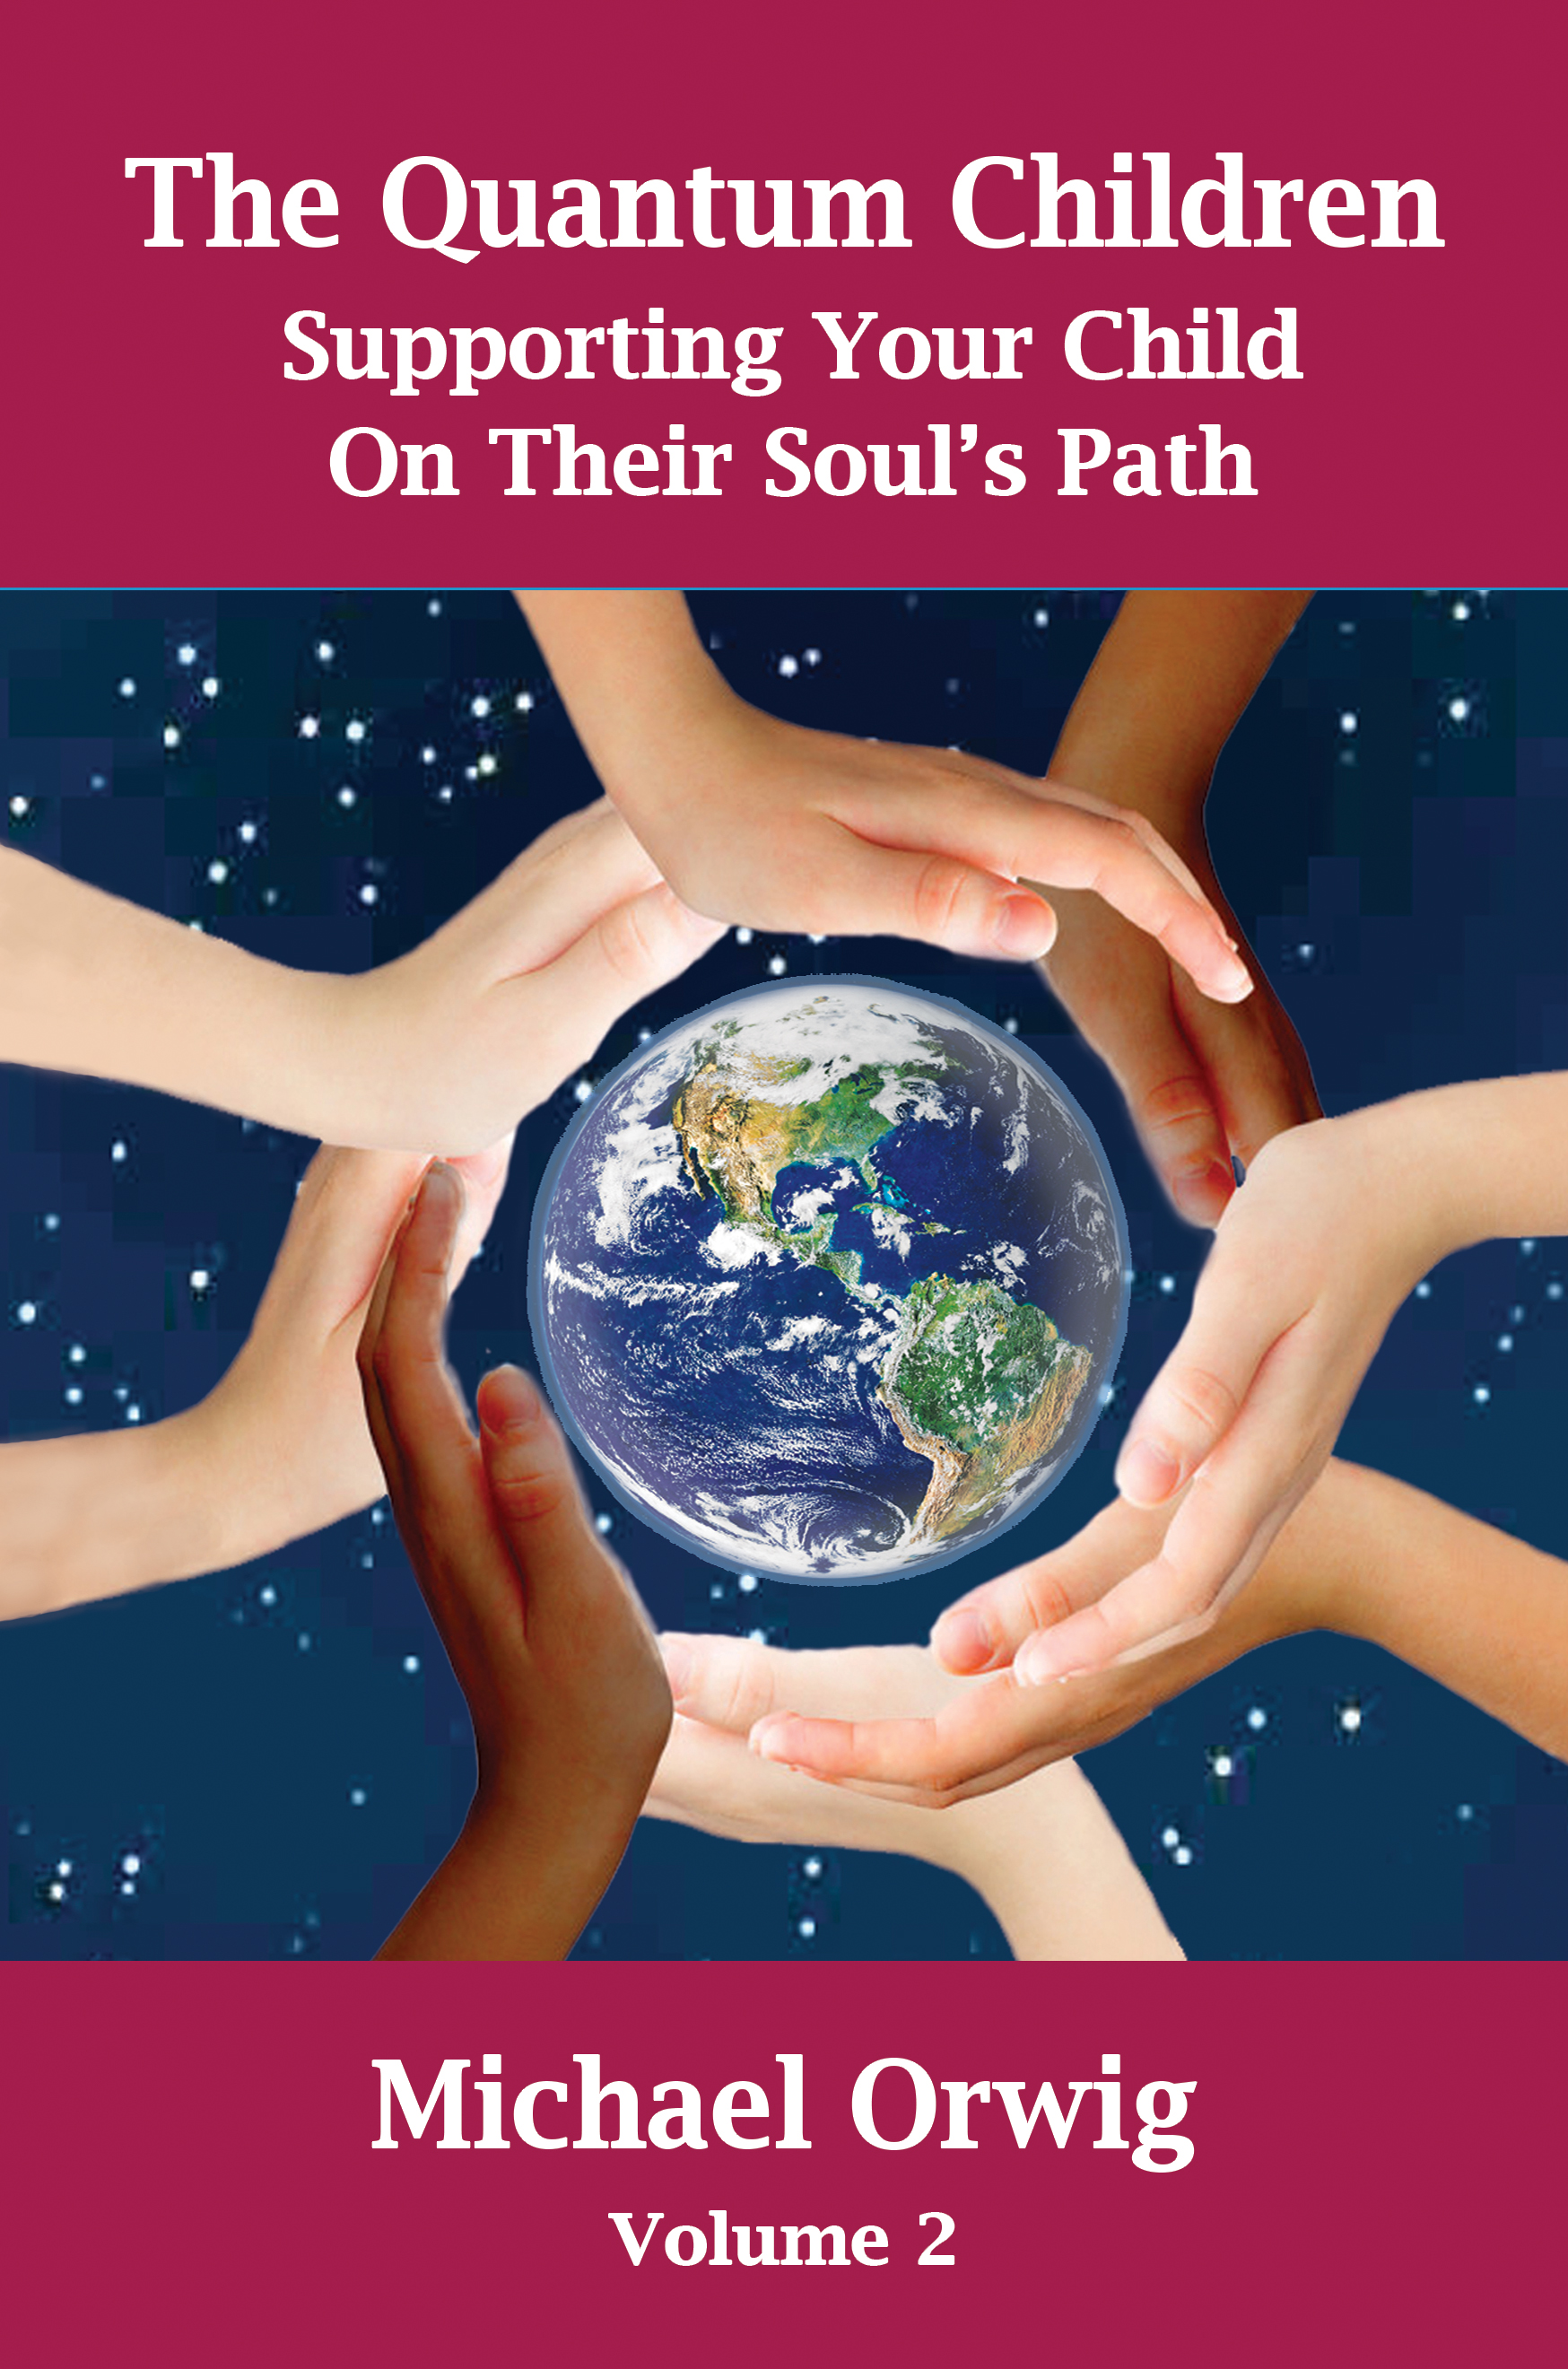 The Quantum Children: Supporting Your Child On Their Soul’s Path, Volume 2